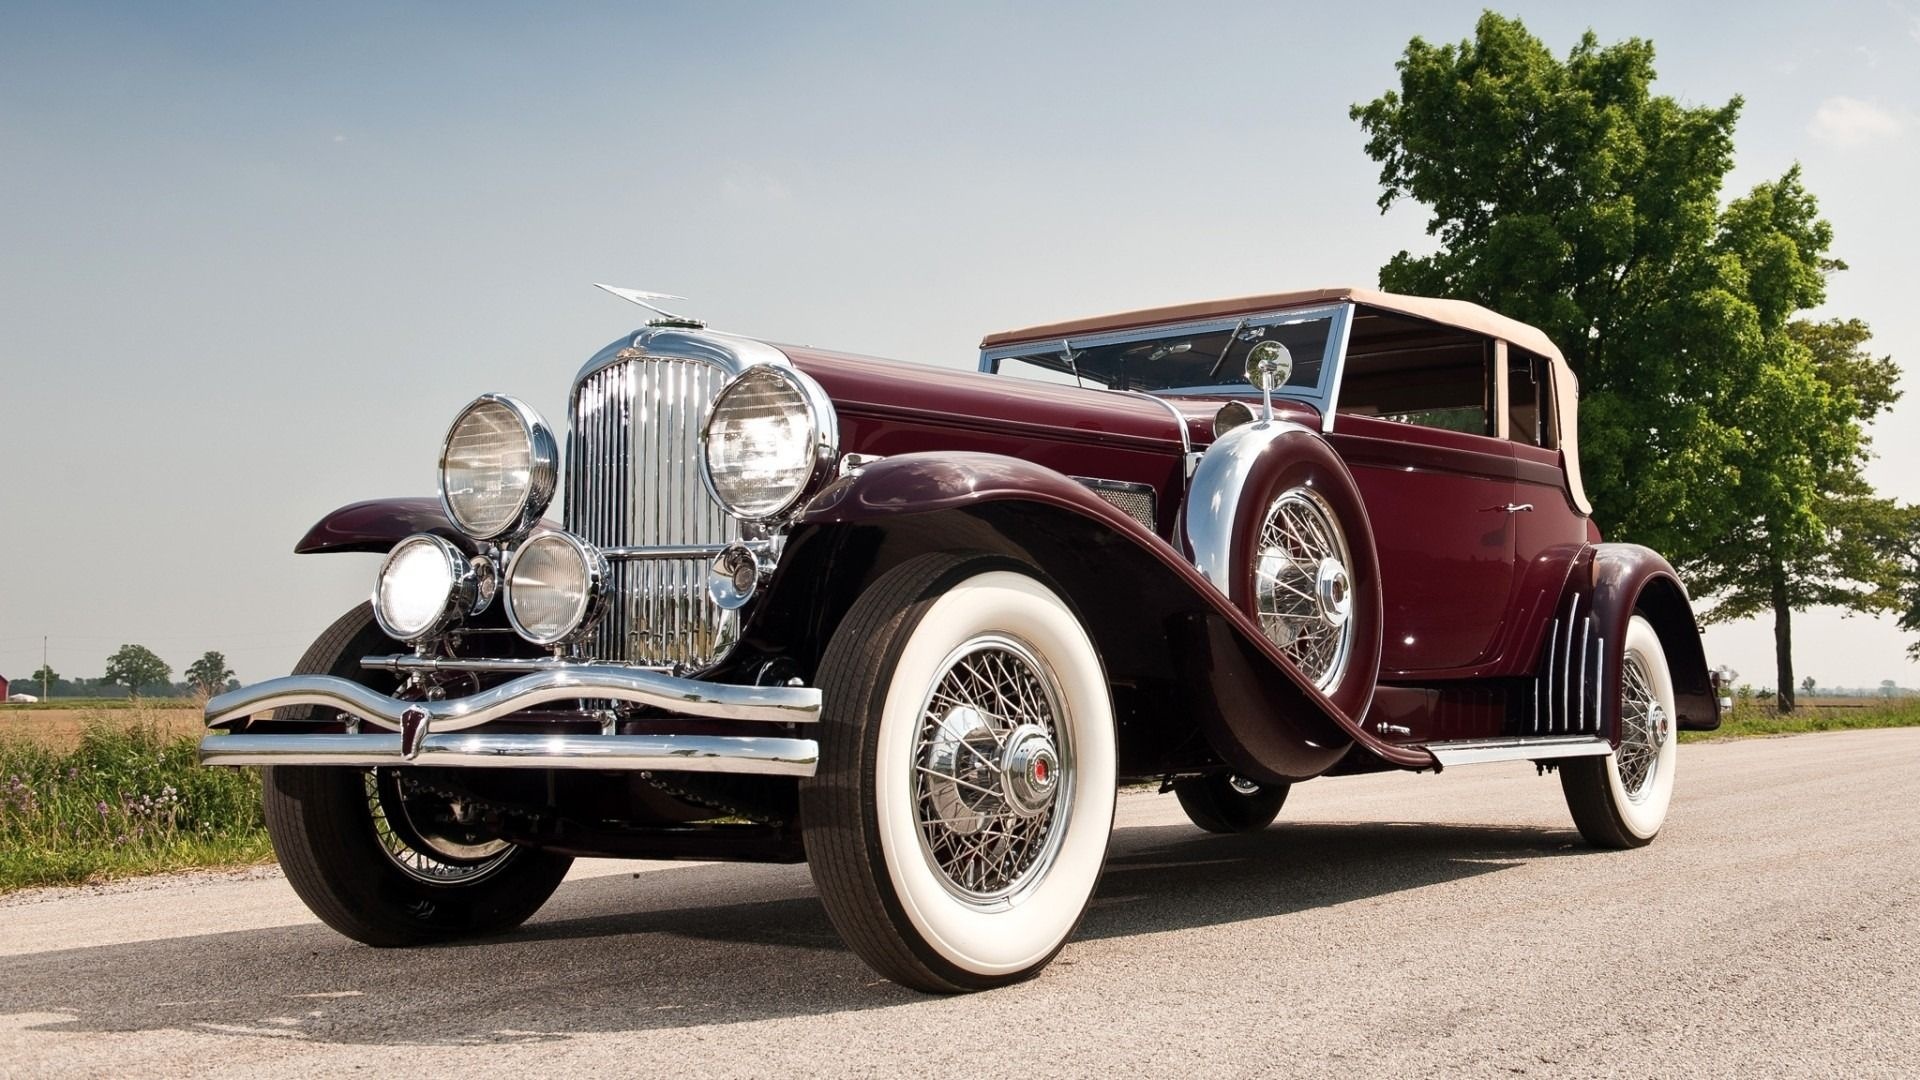 Vintage Car: Innovative technological advancements for the time, Duesenberg. 1920x1080 Full HD Wallpaper.